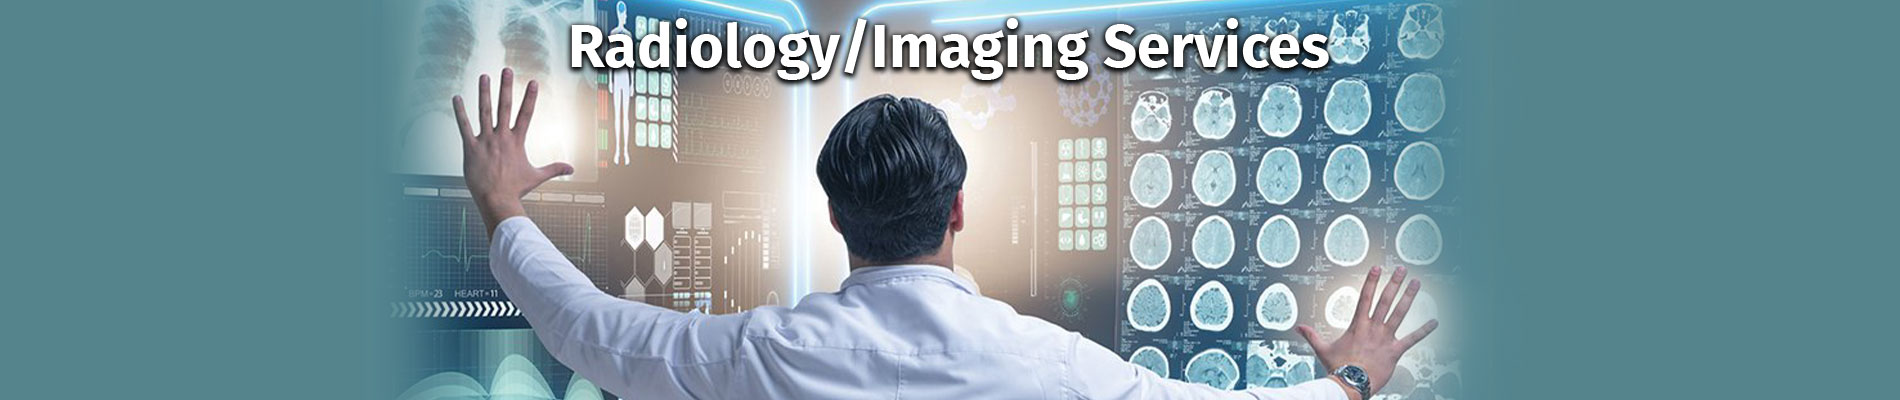 Radiology/ Imaging Services